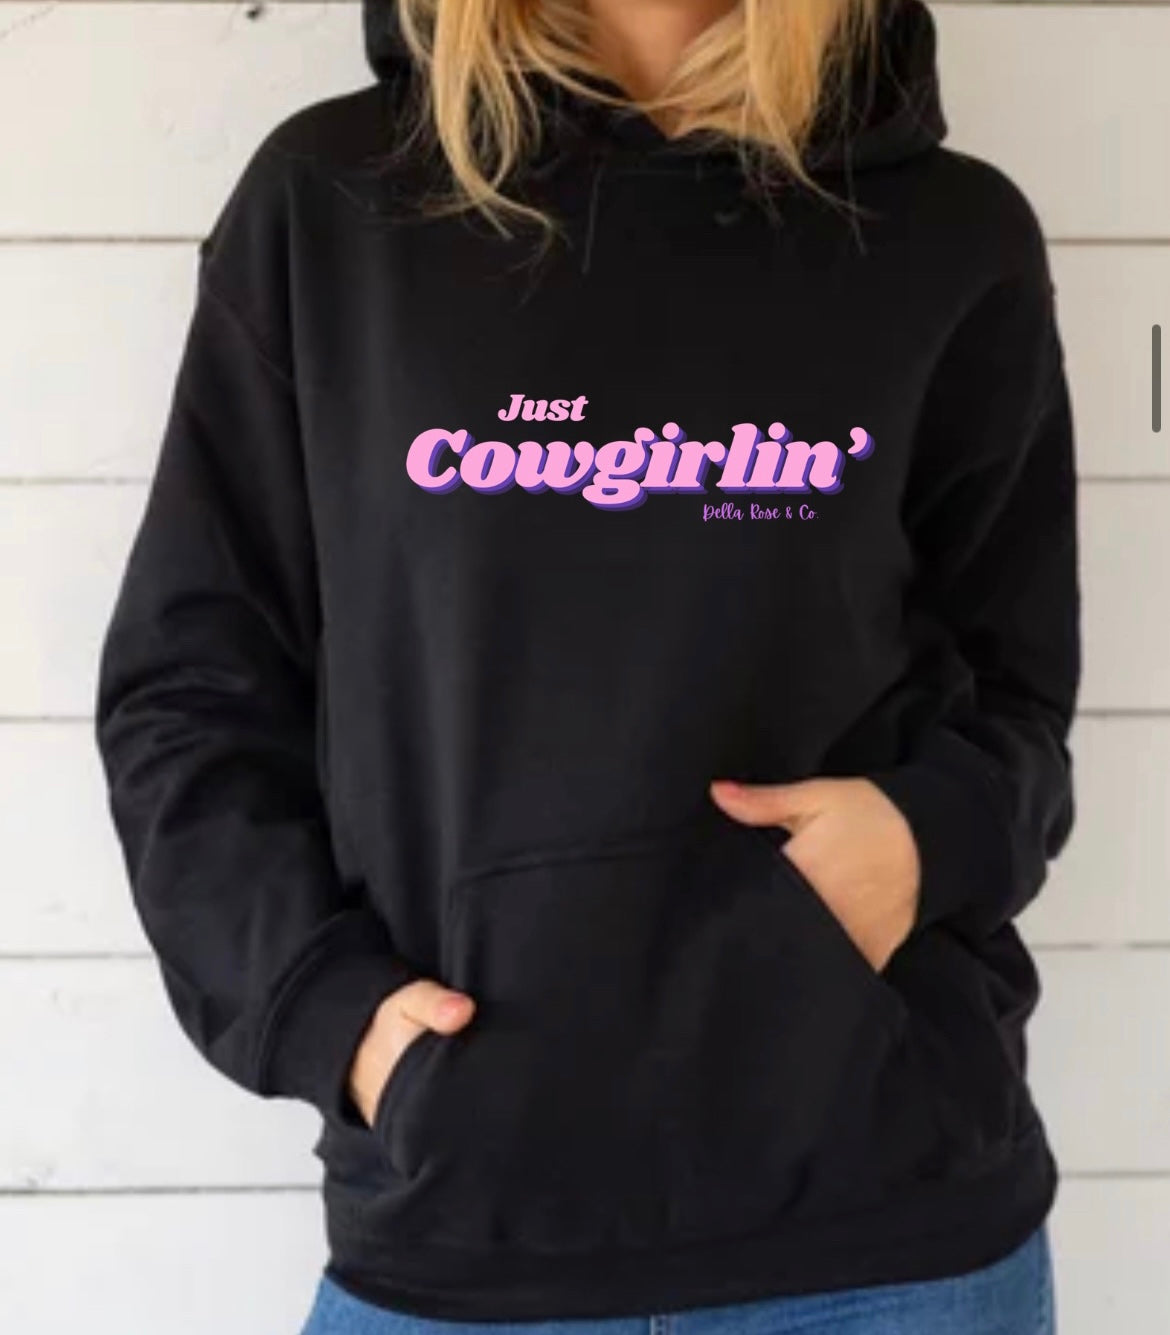 Just Cowgirlin’ Hoodie (unisex sizes)